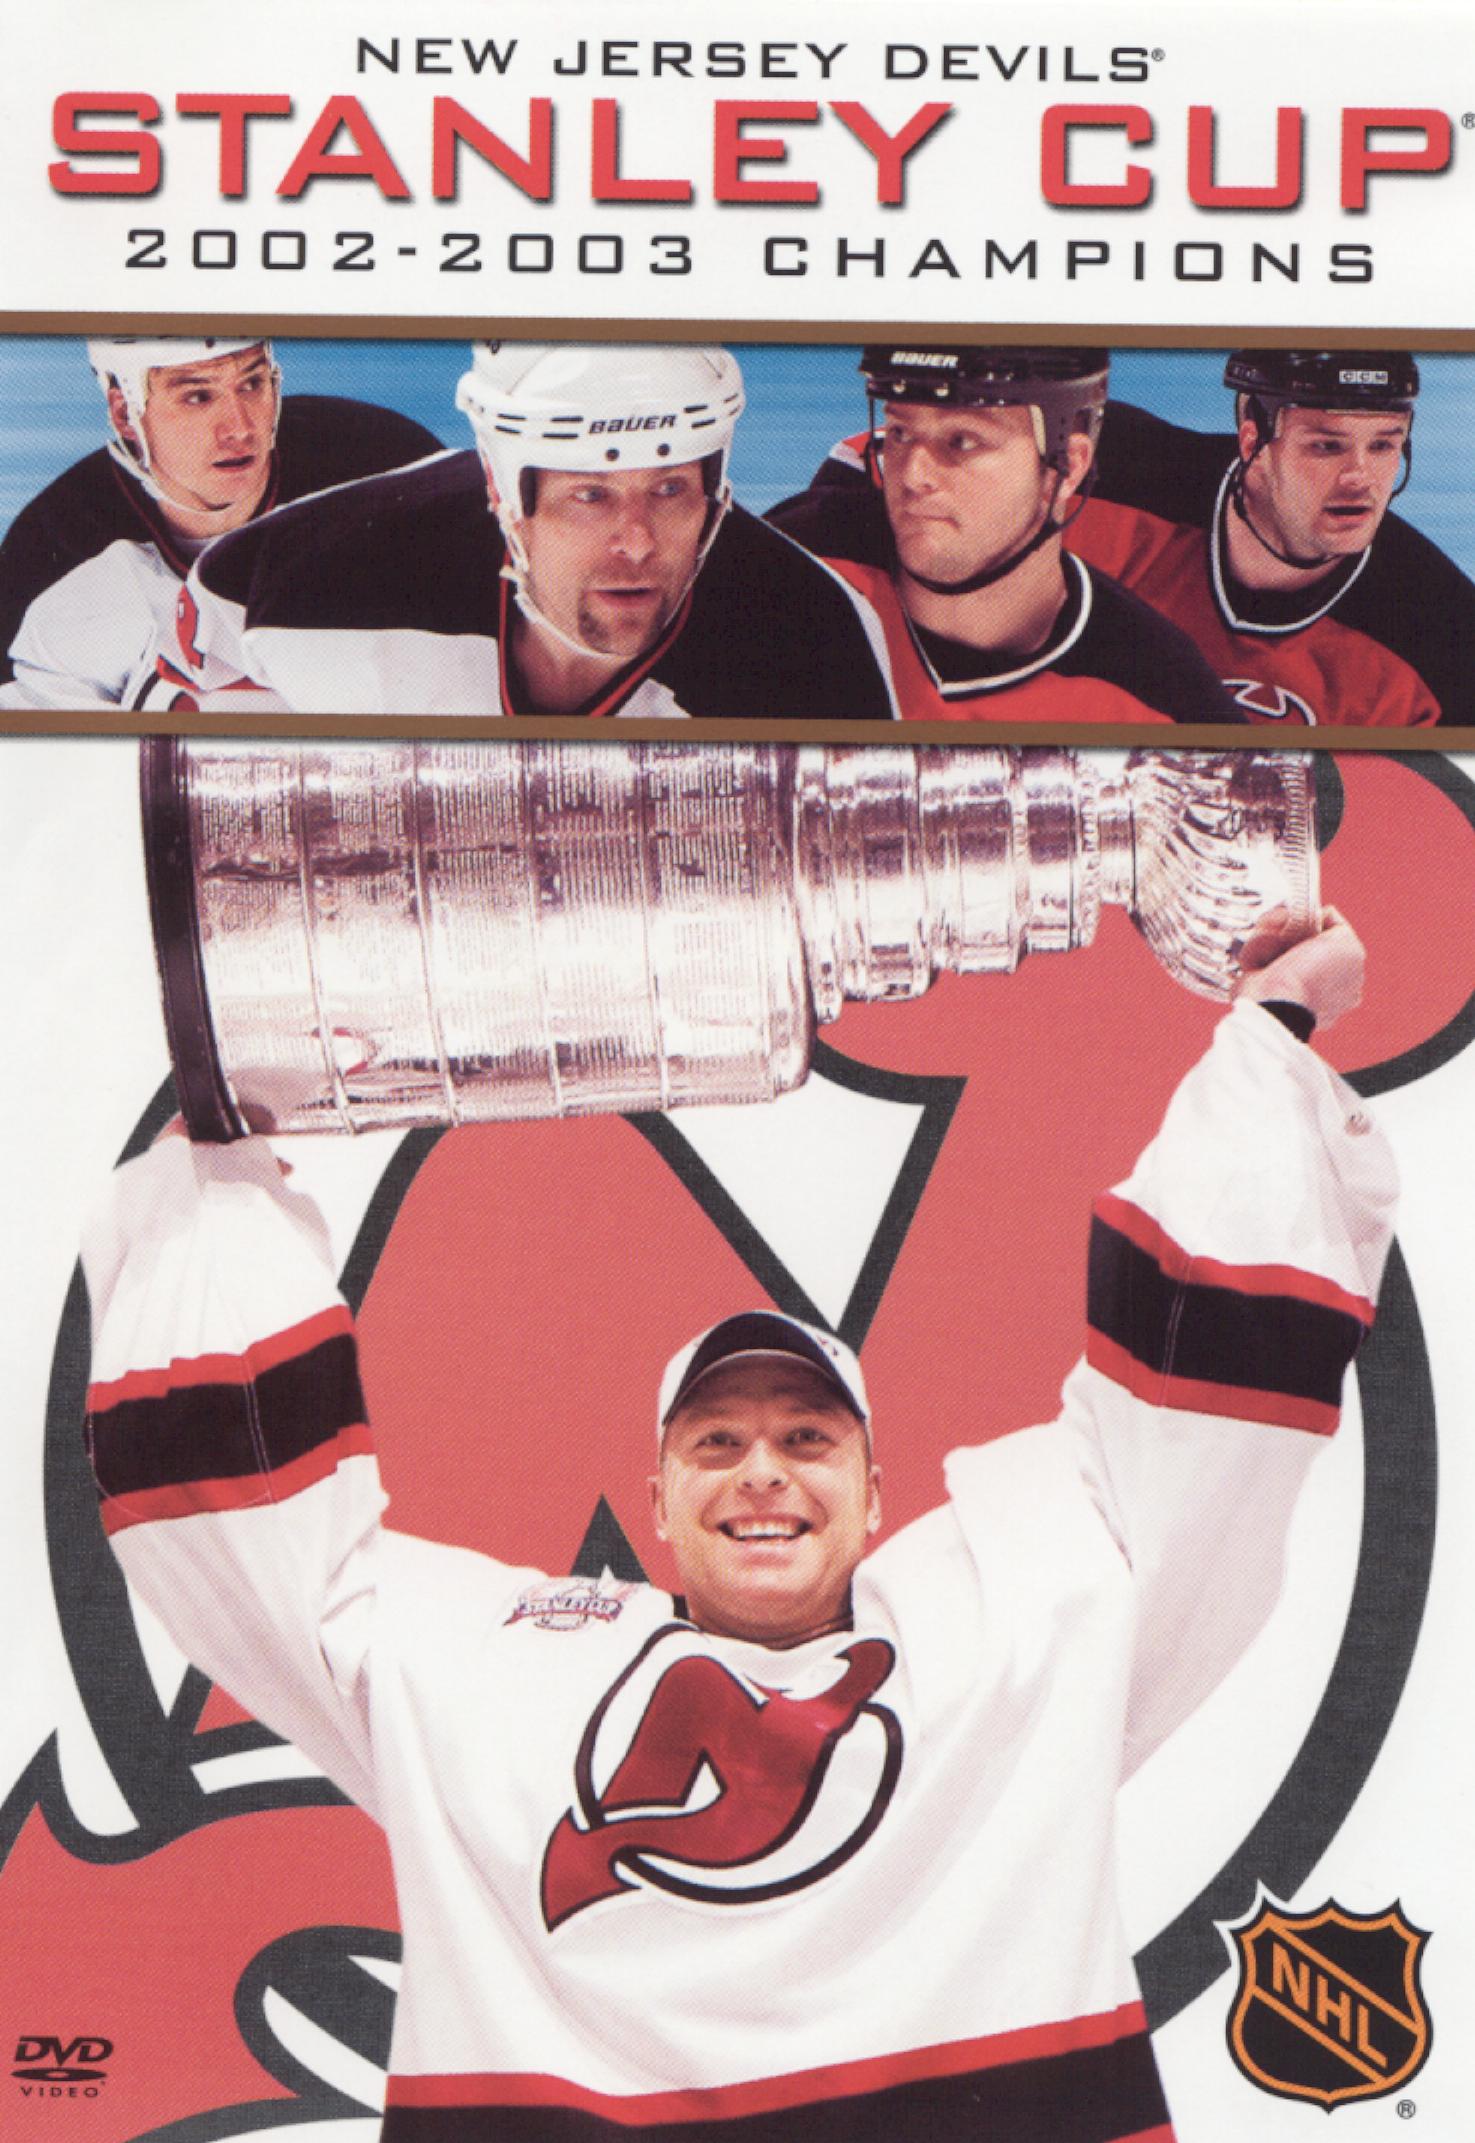 The 2003-04 New Jersey Devils.